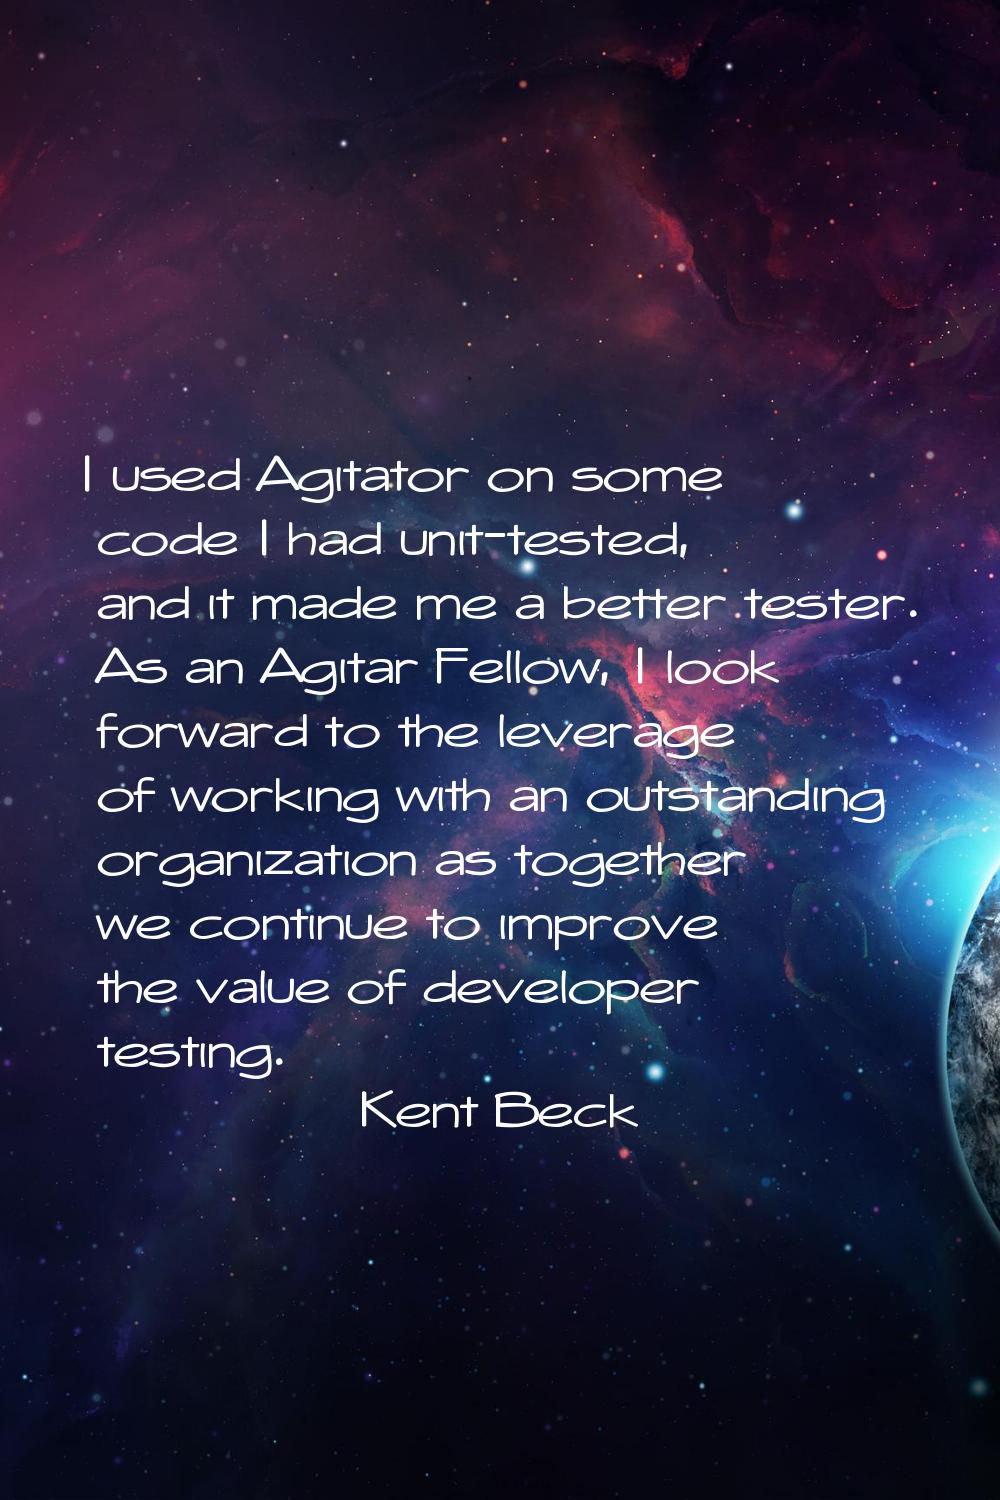 I used Agitator on some code I had unit-tested, and it made me a better tester. As an Agitar Fellow